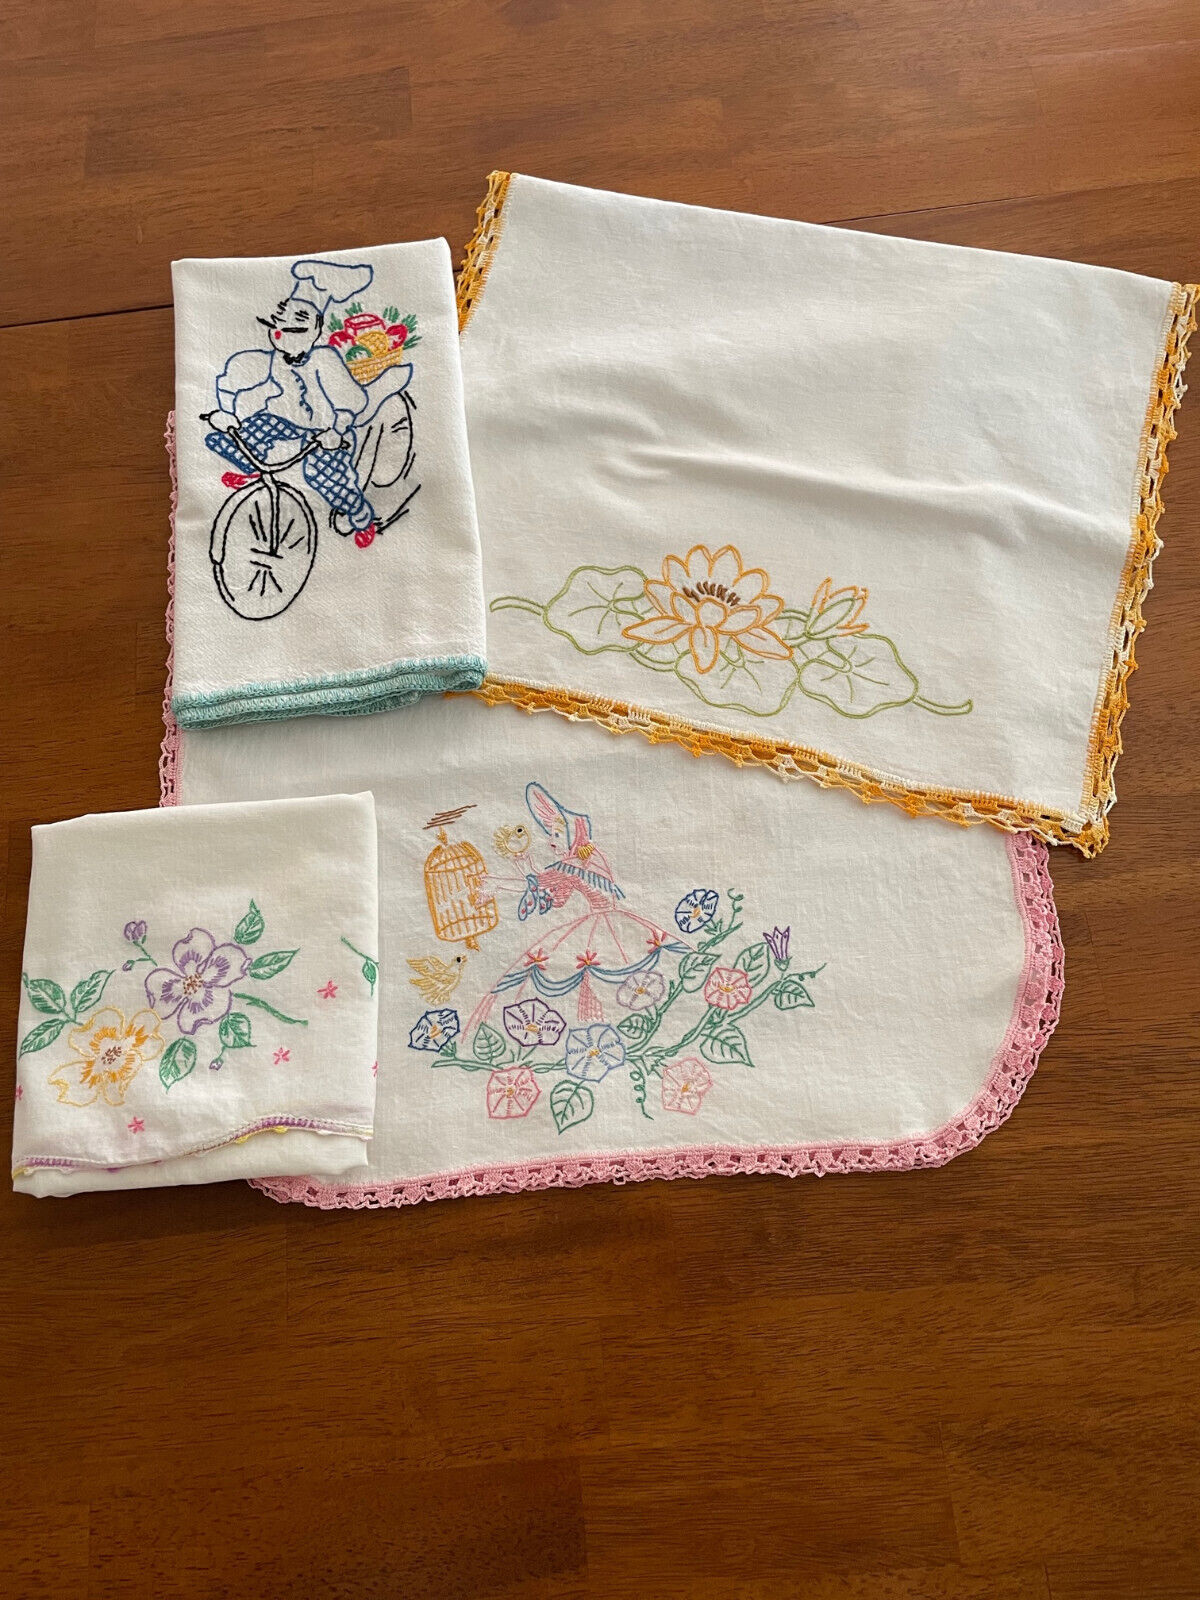 Mixed Lot 4 Pc Vintage Towel Pillowcase 2 Table Runners Embroidered Crocheted